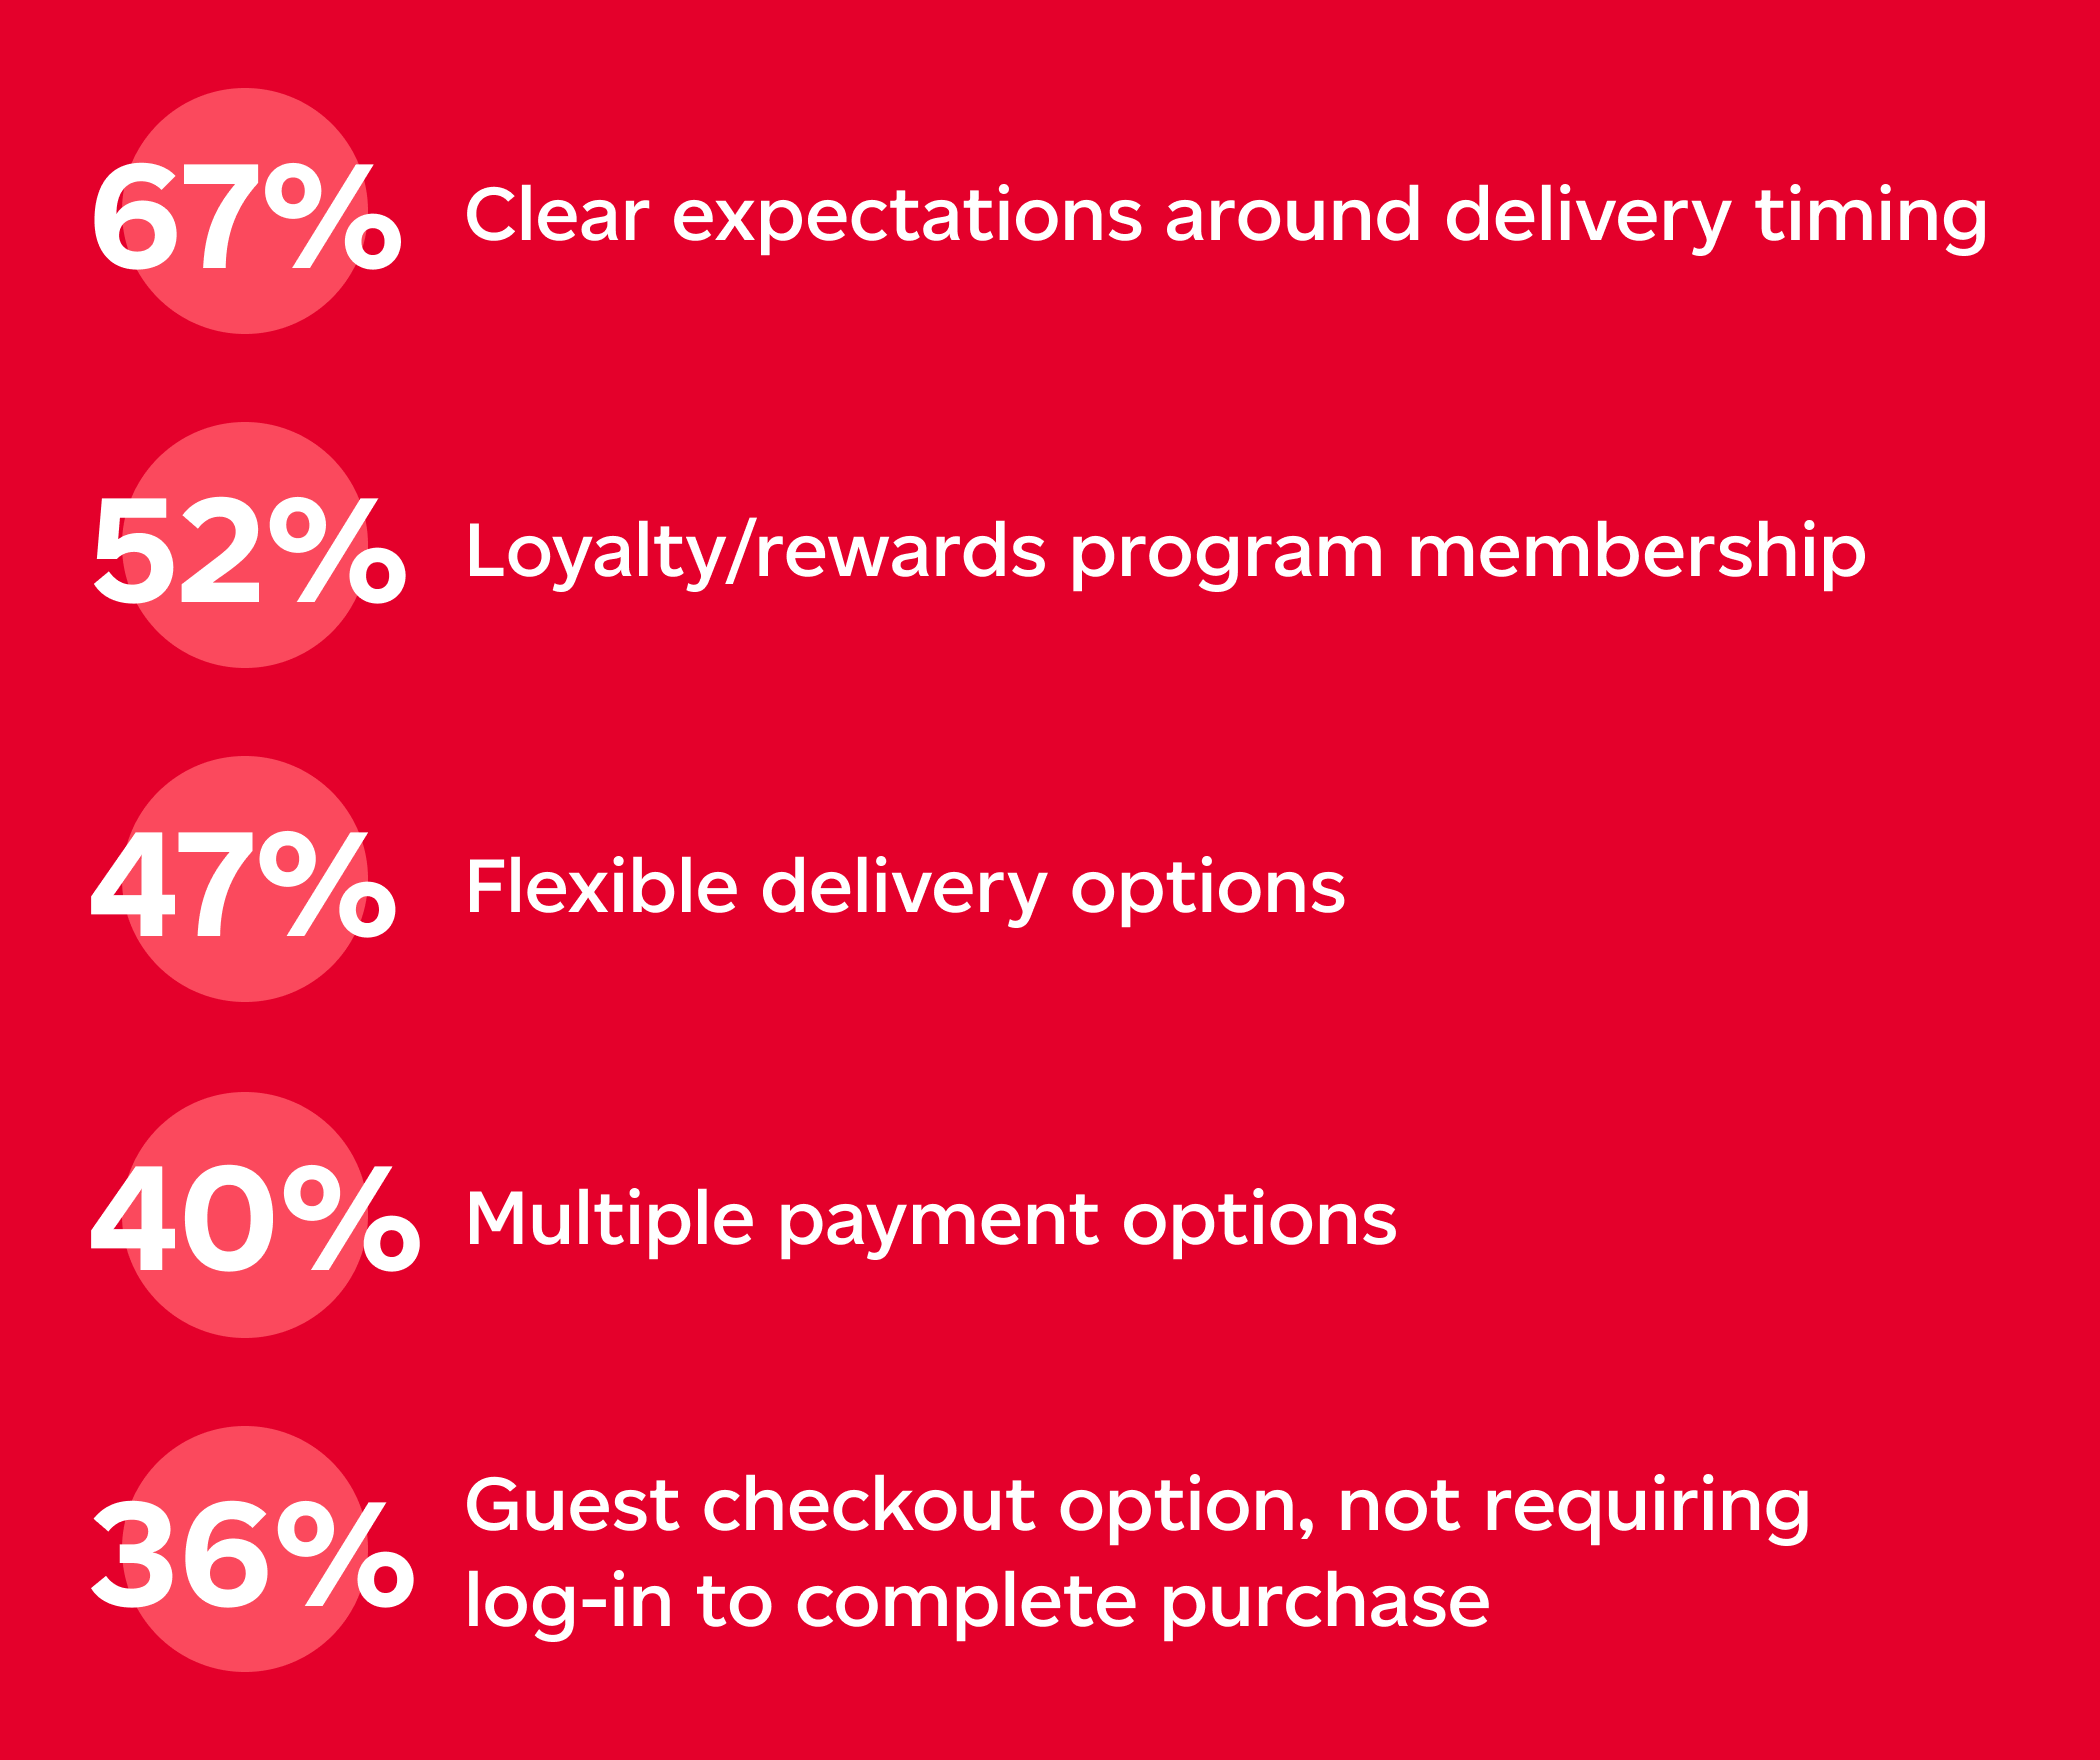 When choosing a retailer, shoppers consider the following influential factors from retailers: (67%) clear expectations around delivery timing, (52%) loyalty-rewards program membership, (47%) flexible delivery options, (40%) multiple payment options, (36%) guest checkout option that does not require log-in to complete purchase. Statistics courtesy of Phase 5, Canadian Online Shopper Study, May 2022.